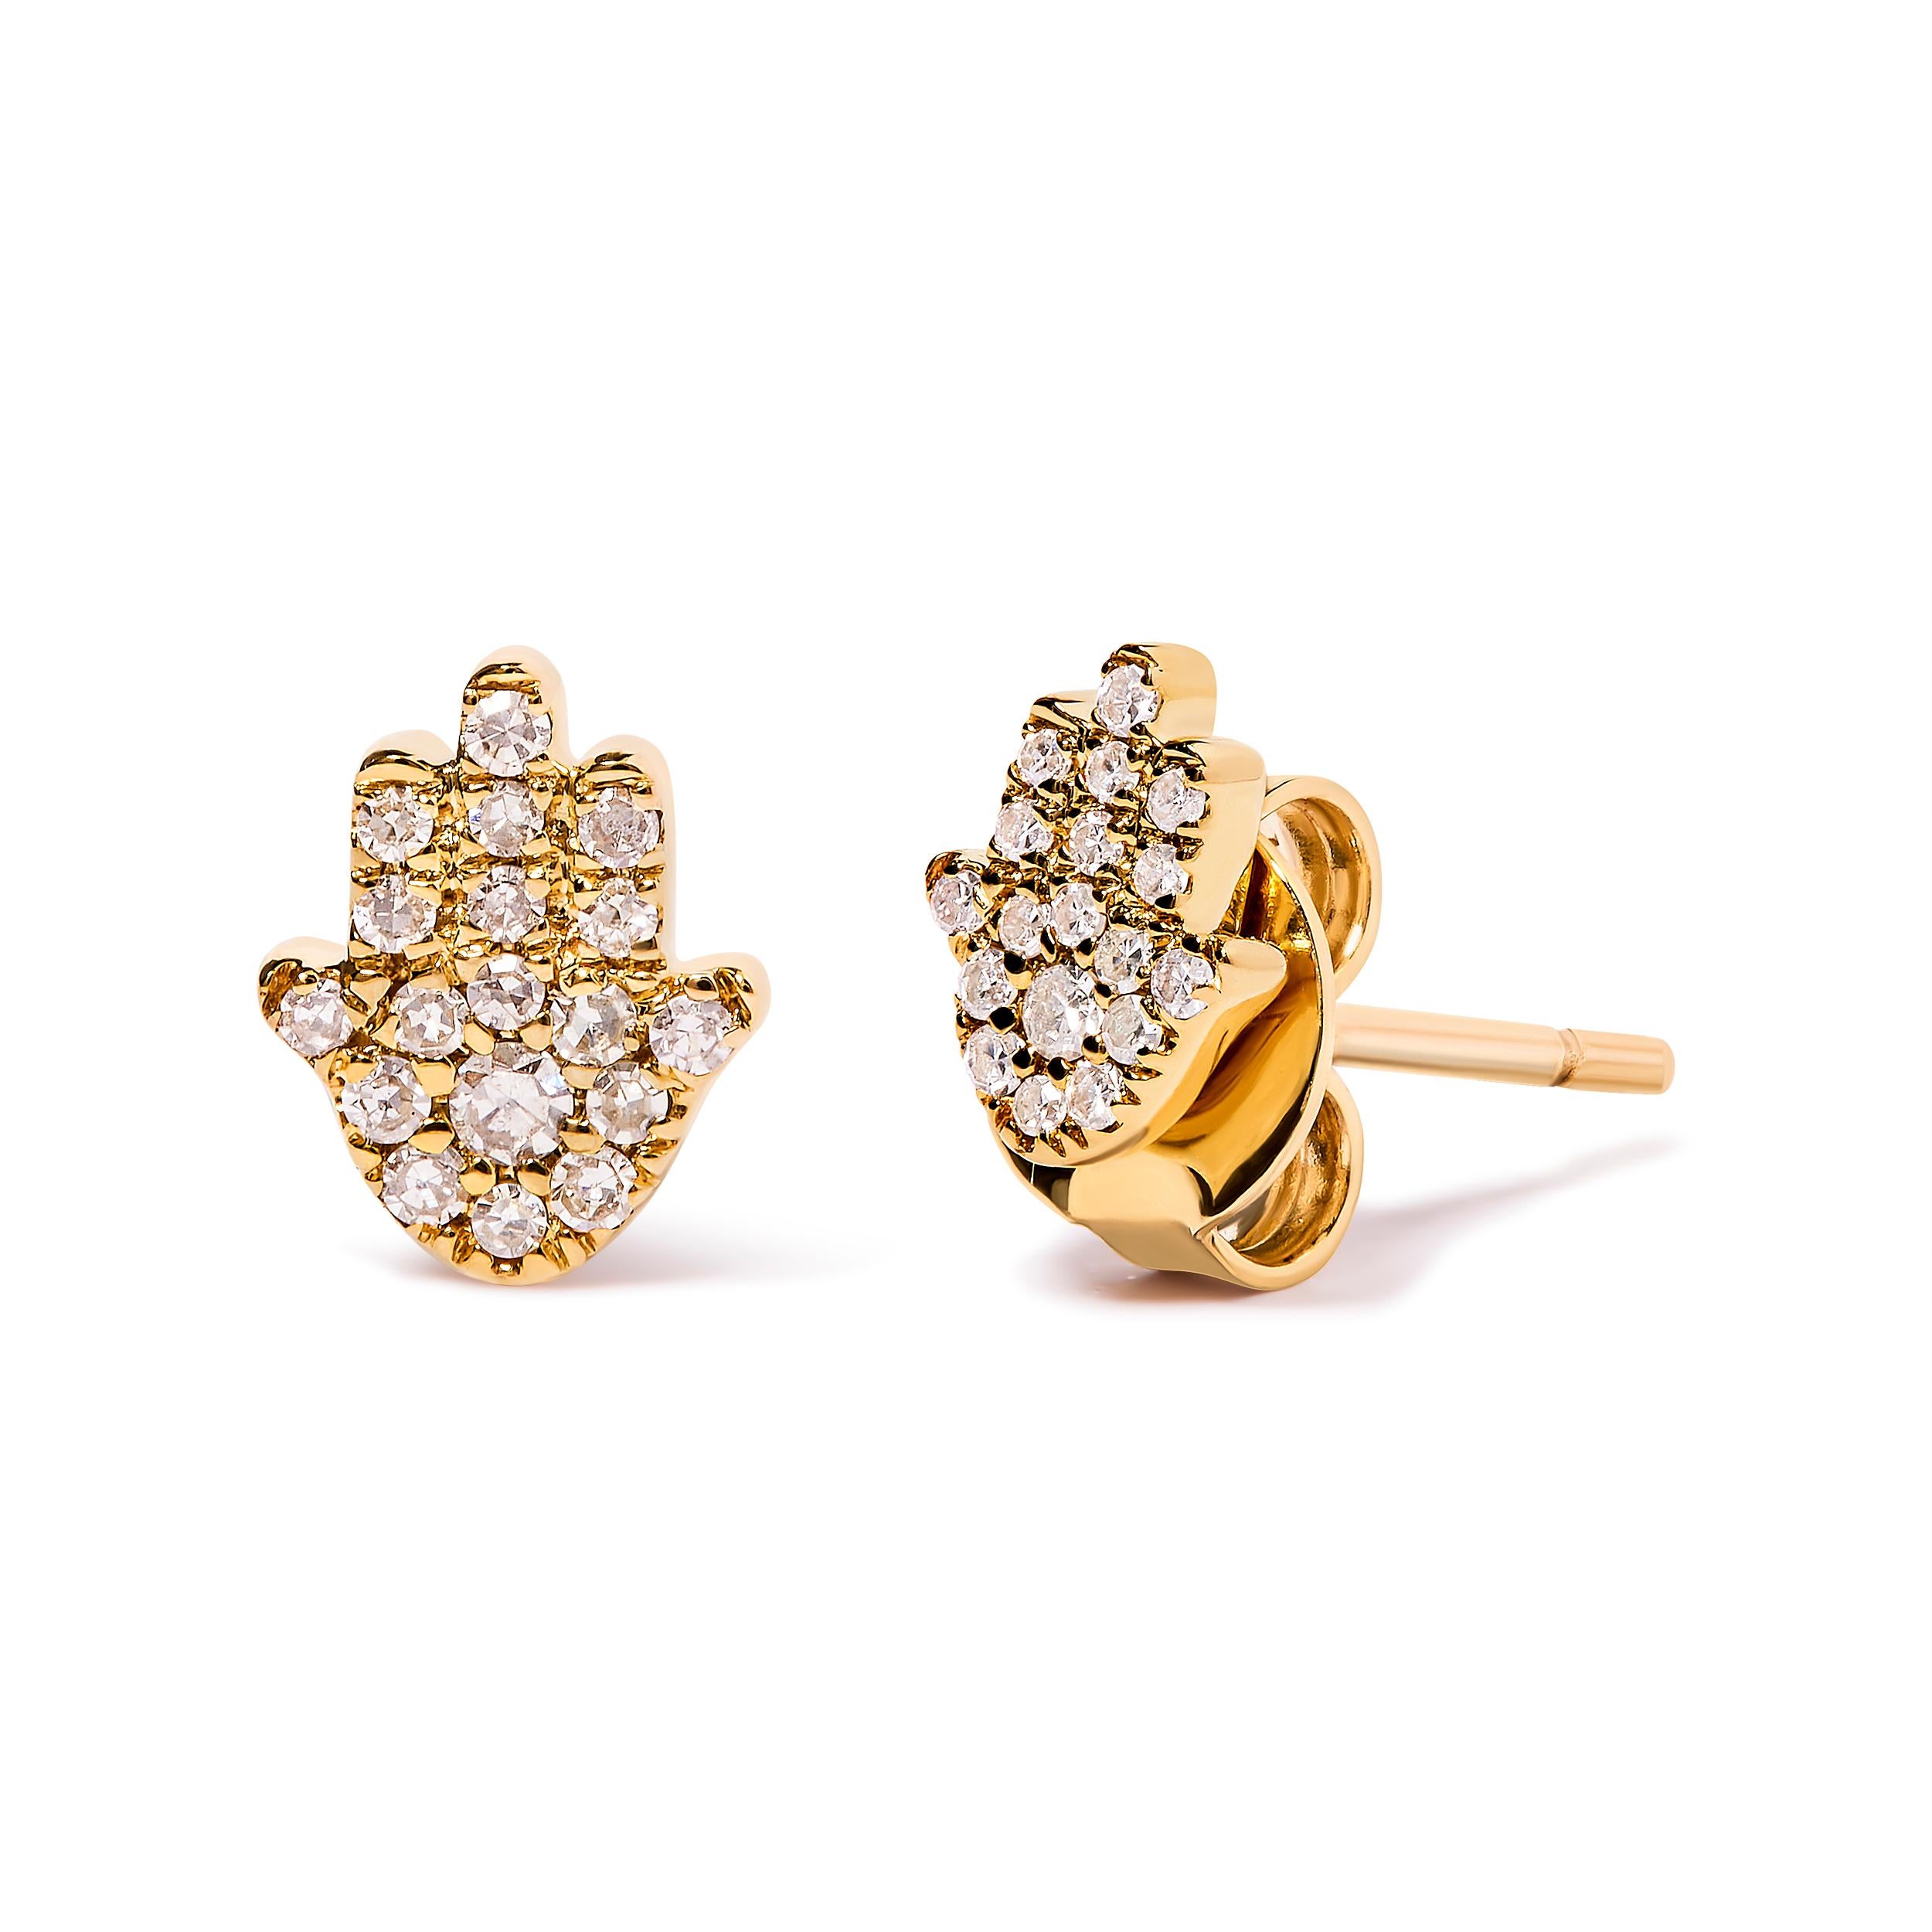 Introducing a captivating symbol of protection and beauty, these 10K Yellow Gold Diamond Accented Hamsa Stud Earrings are an absolute must-have for any woman seeking elegance and grace. Crafted with meticulous attention to detail, each earring